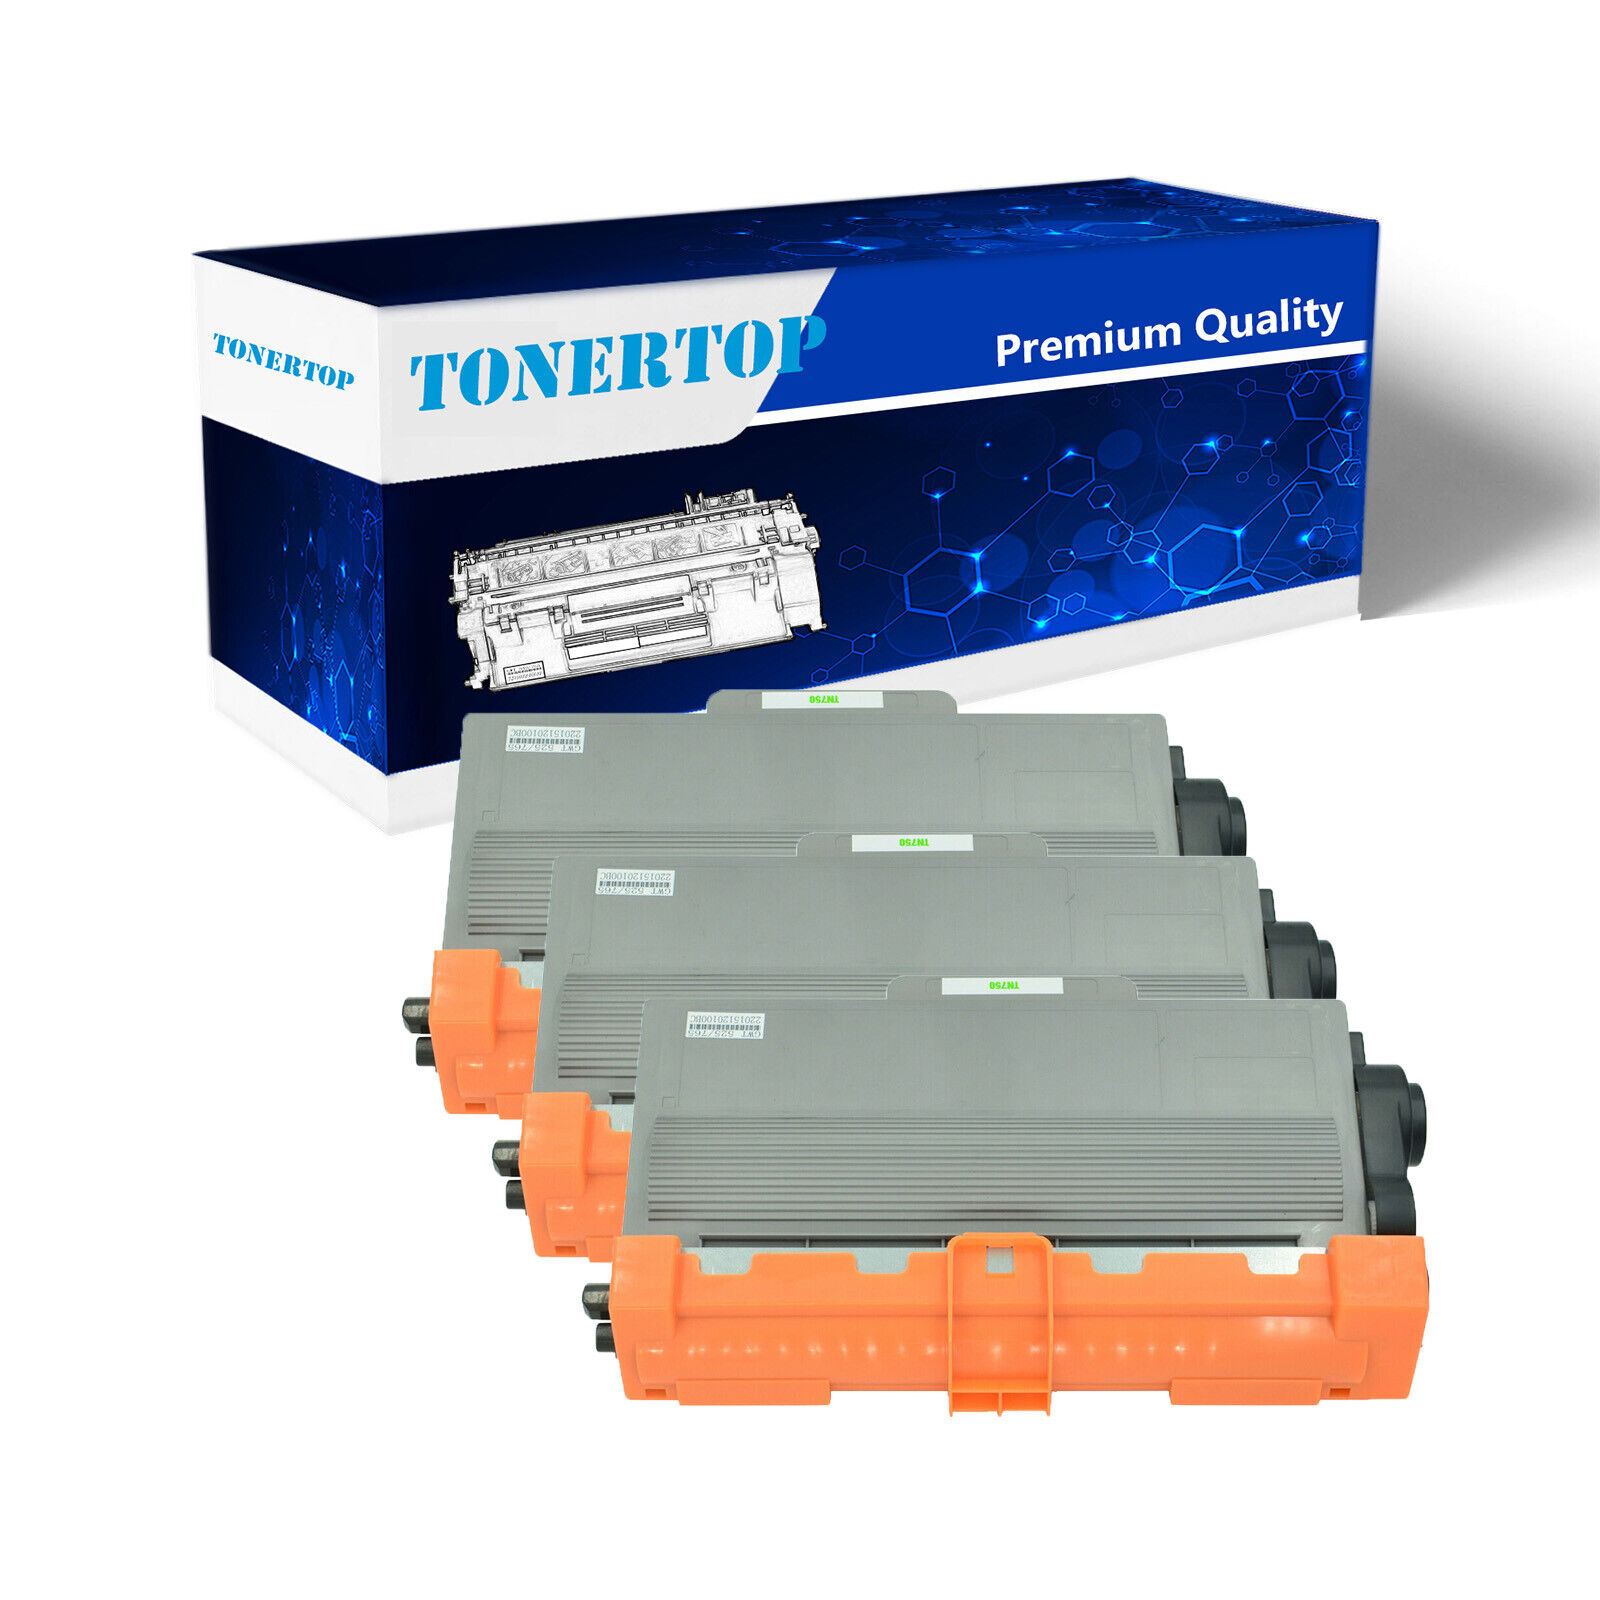 3PK TN750 Toner Fit for Brother DCP-8110DN 8150DN 8155DN 8250DN MFC-8950DW TN720